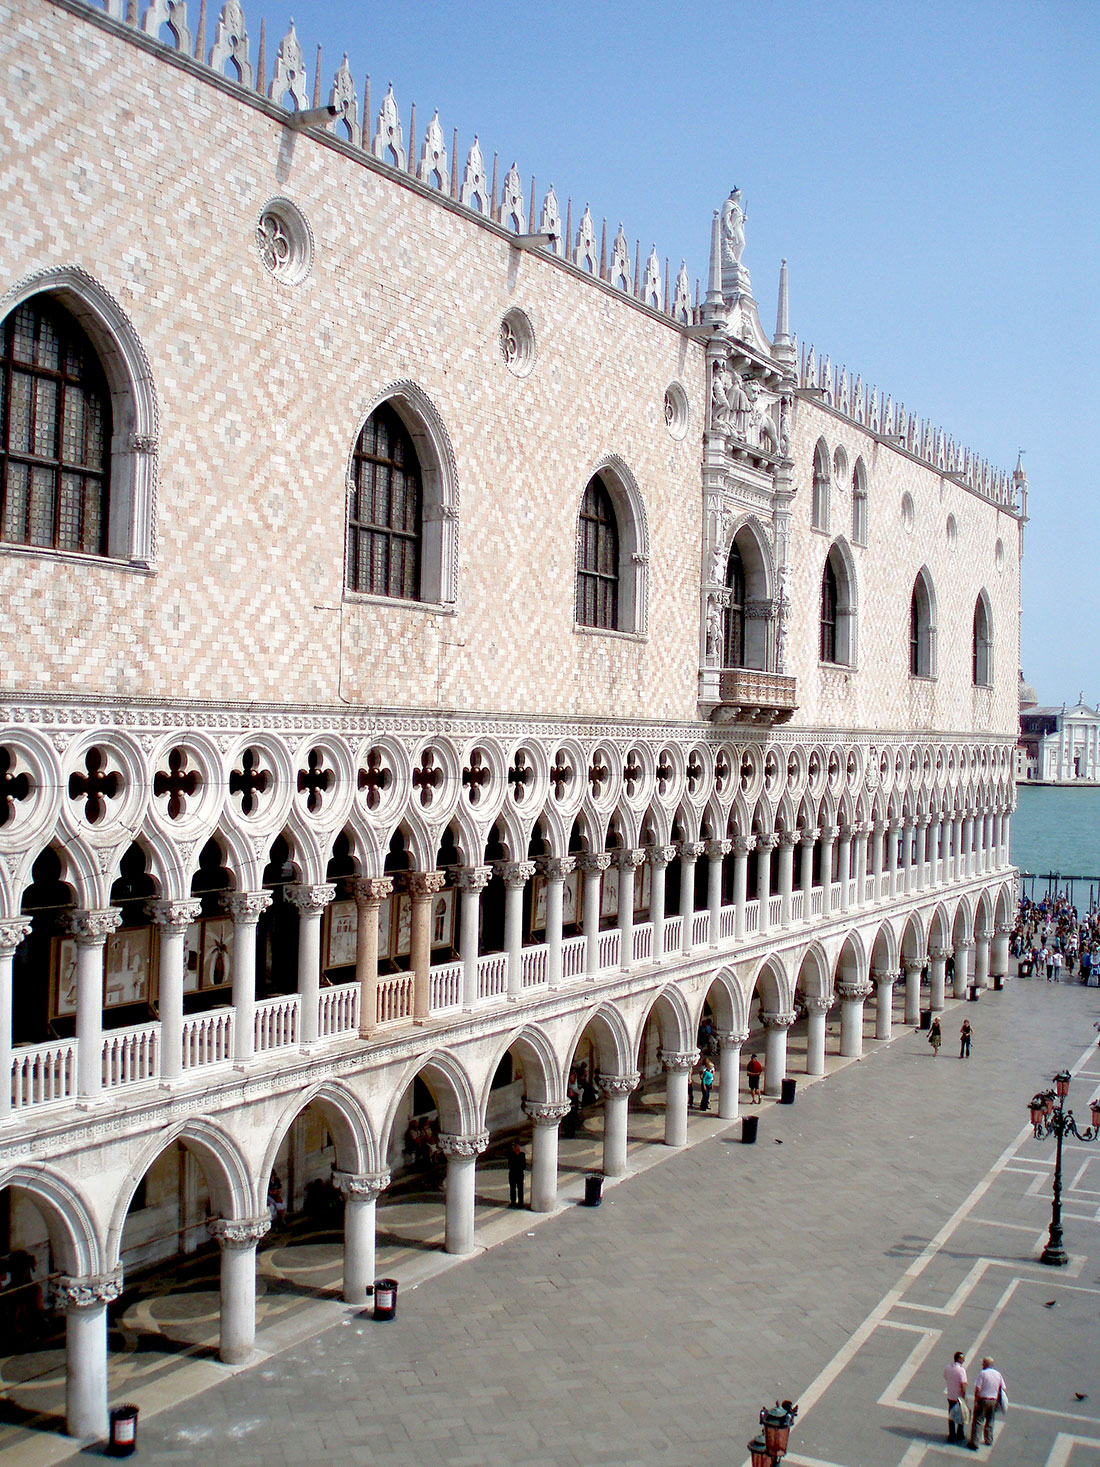 The Doge's Palace (Palazzo Ducale) in Venice